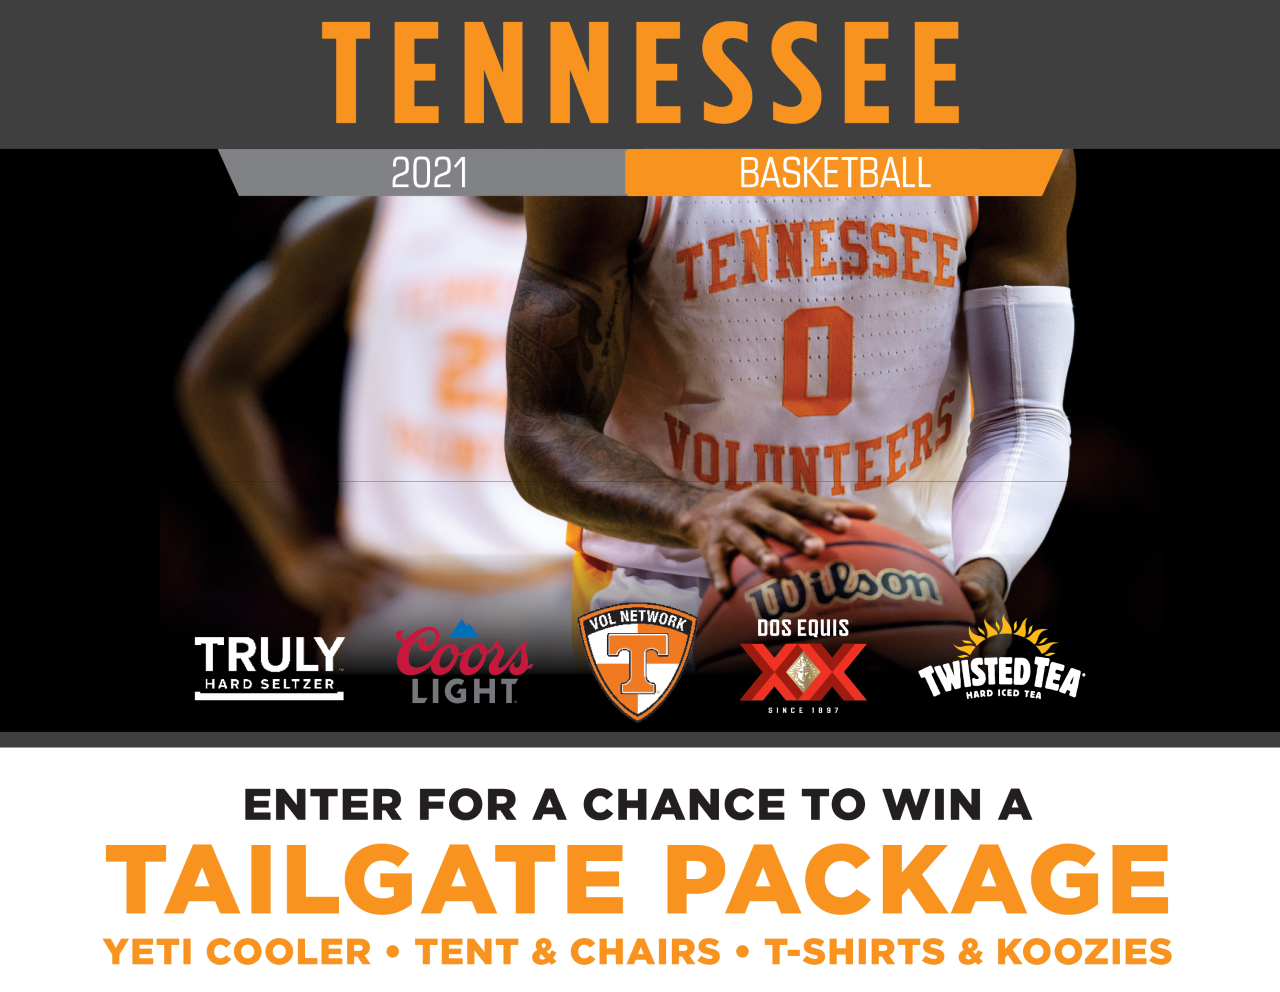 WIN A TAILGATE PACKAGE FROM CHEROKEE AND MAPCO!